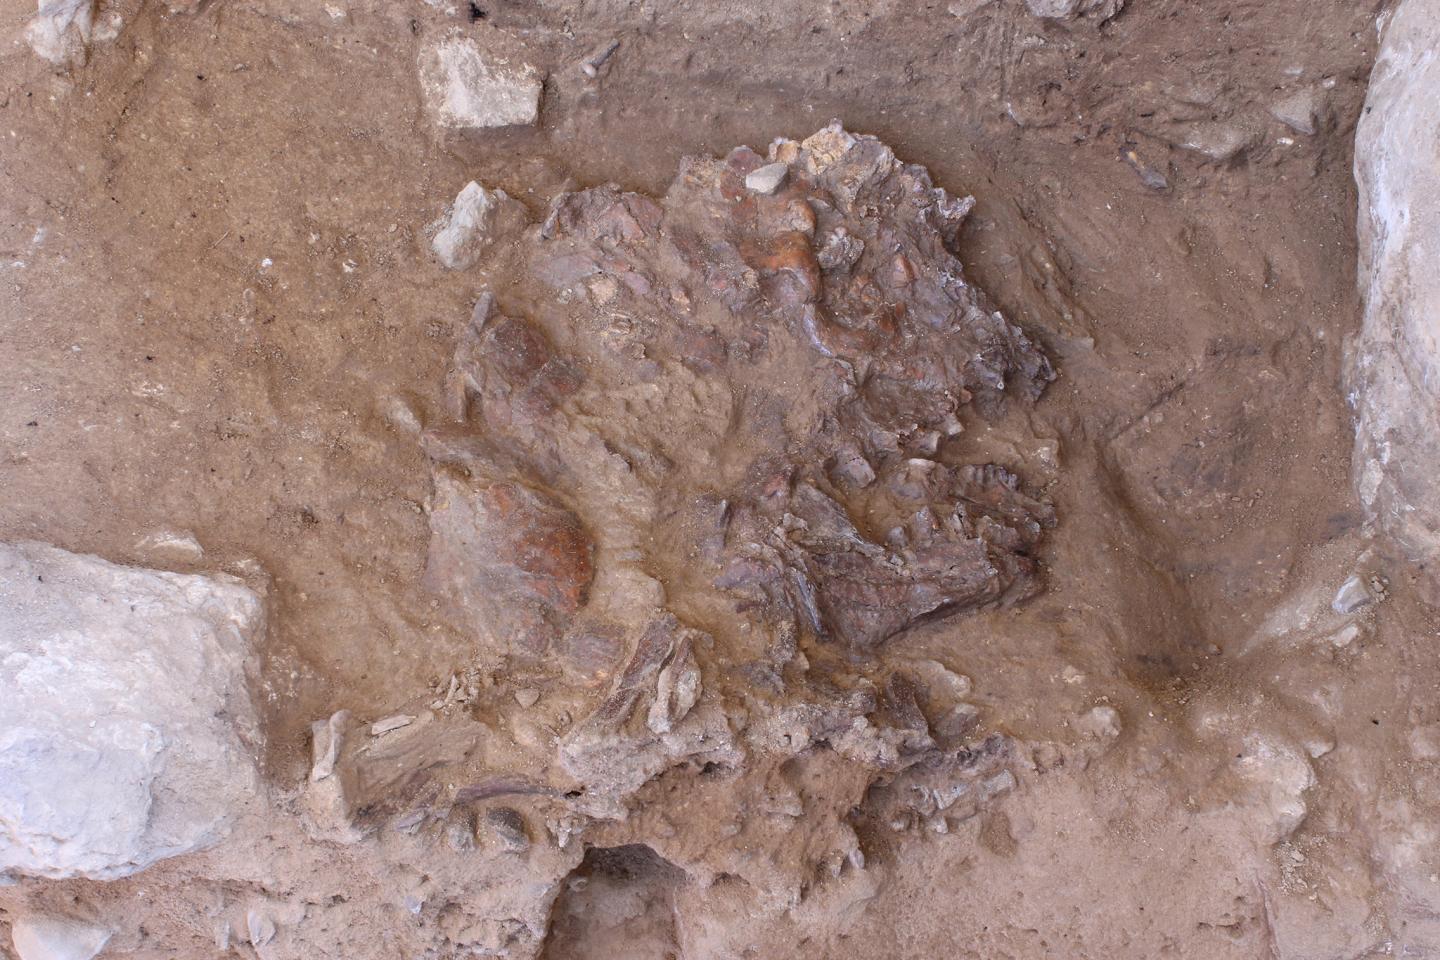 fossilized remains of a skull buried in the ground